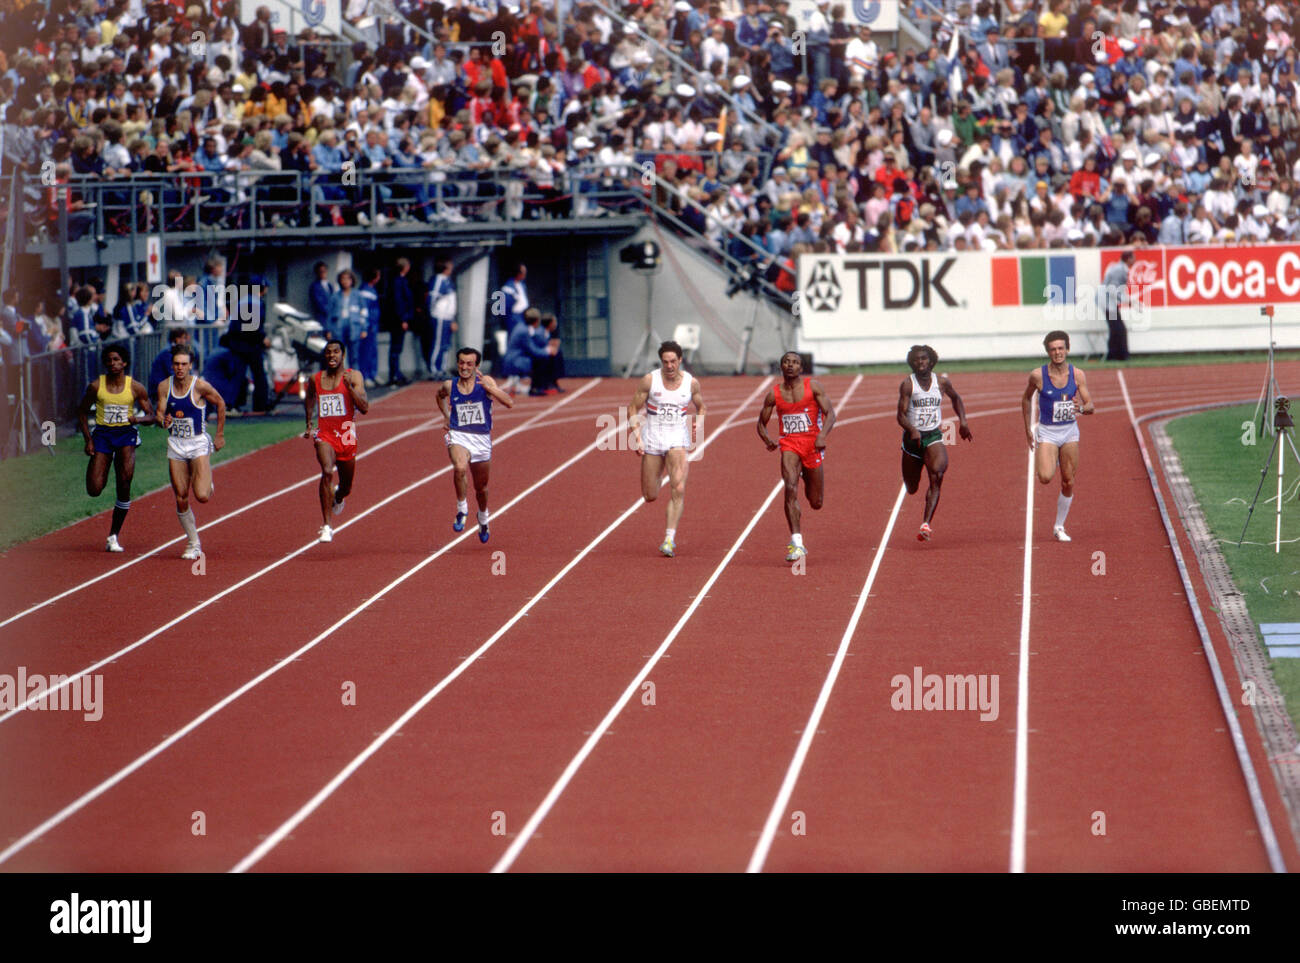 USA's Calvin Smith (third r) leads from teammate Elliott Quow (third l), Italy's Pietro Mennea (fourth l), Great Britain's Alan Wells (fourth r), East Germany's Frank Emmelmann (second l), Nigeria's Innocent Egbunike (second r), Italy's Carlo Simionato (r) and Brazil's Joao Batista Da Silva (l) Stock Photo